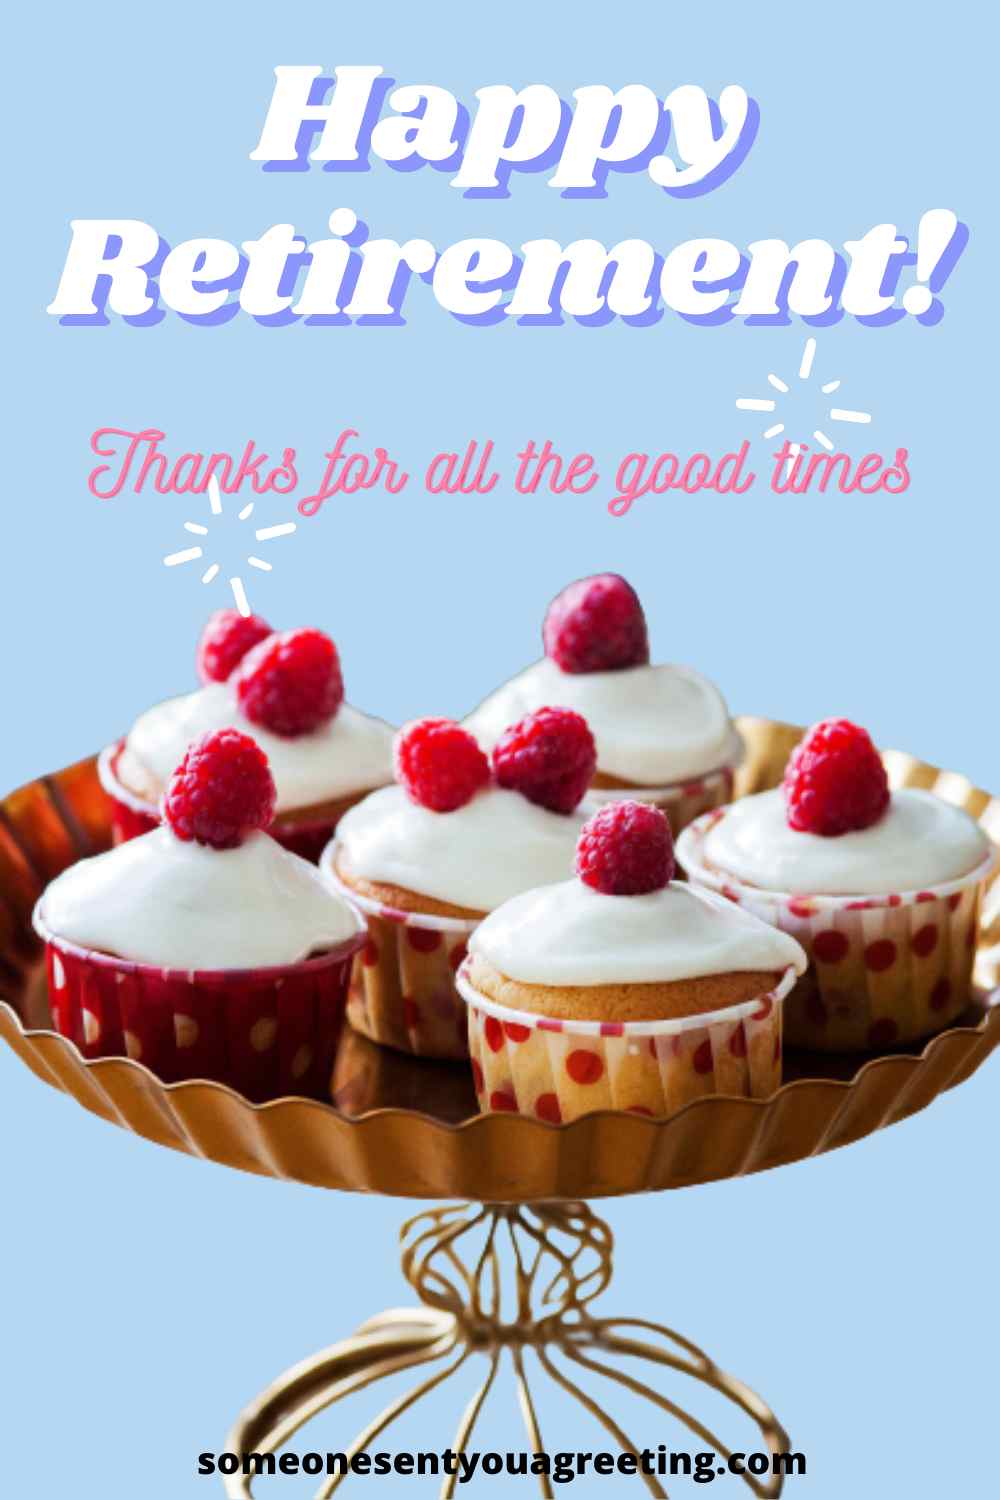 What To Say On A Retirement Cake? 100 Retirement Cake Saying Ideas -  Retirement Tips and Tricks